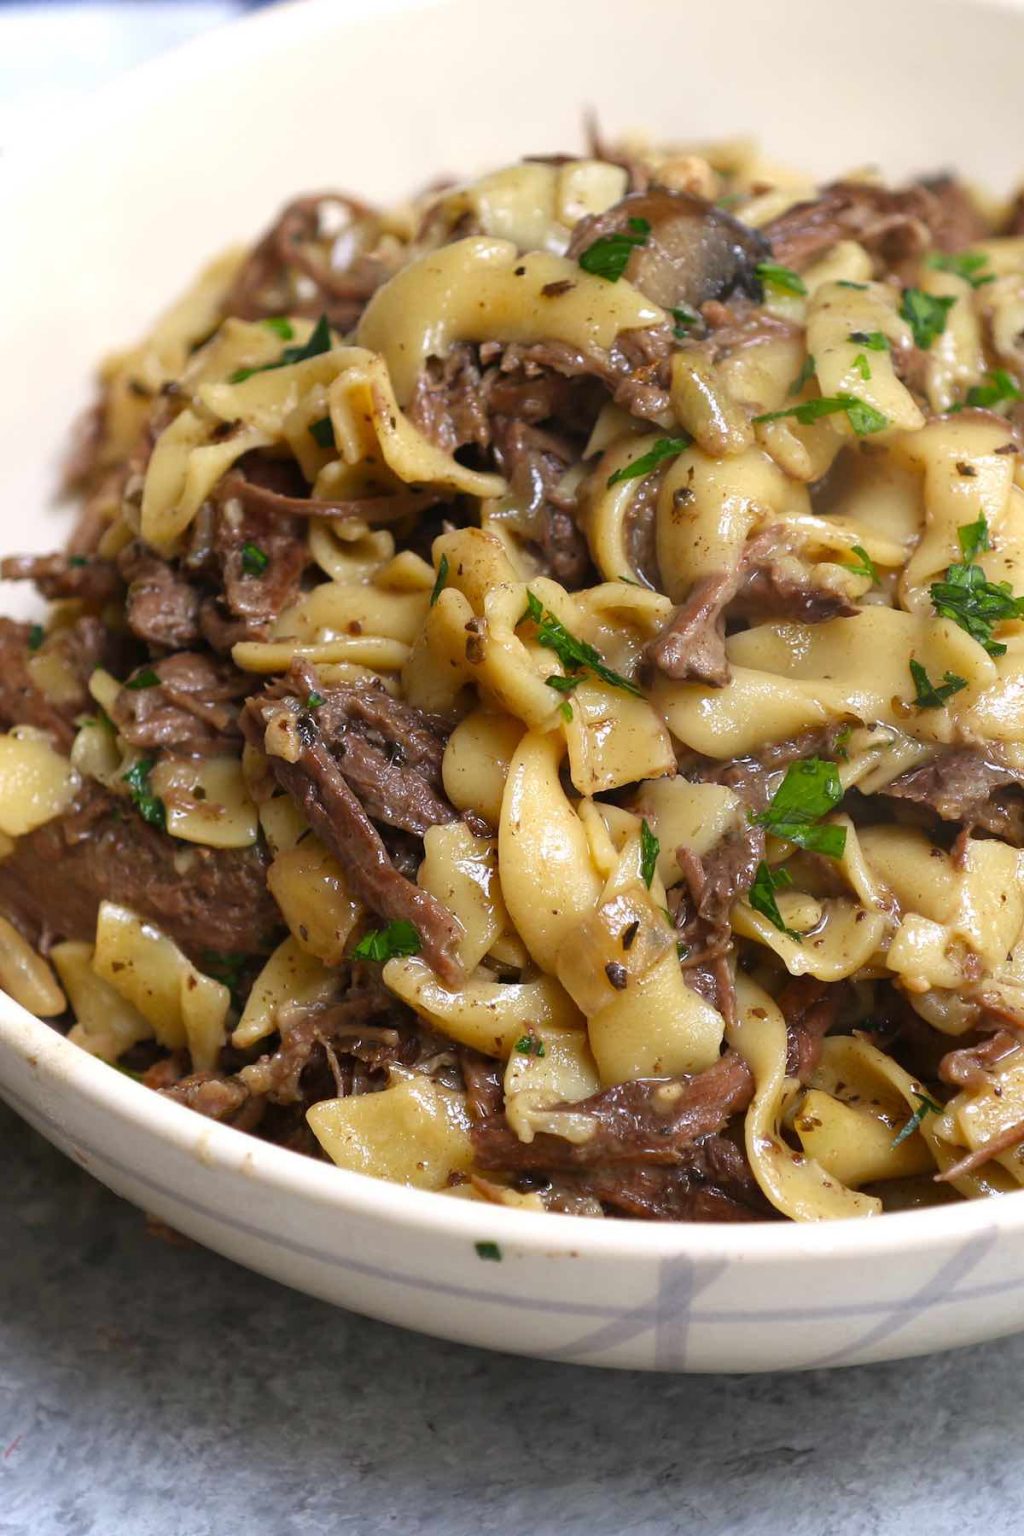 Crock Pot Beef and Noodles - TipBuzz